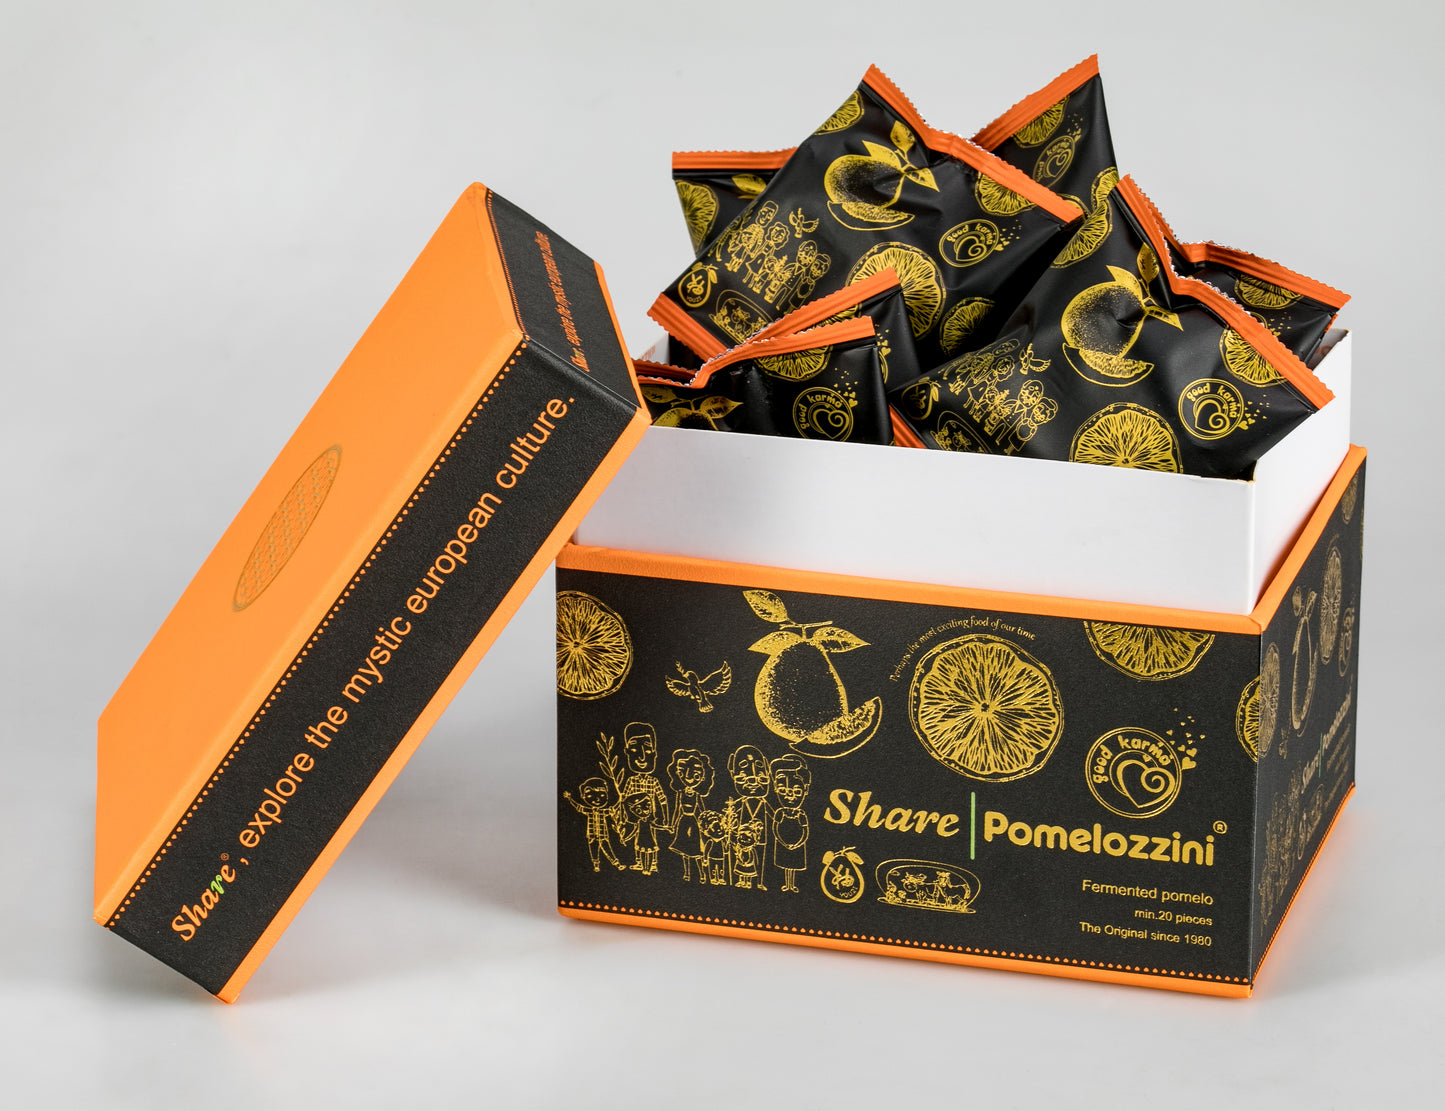 Share Pomelozzini® (160g 20-pc Box): 30+ month fermented Pomelo, effective natural alternative to lab-made laxatives and probiotics, 30-month natural fermented fruit, vegan & non-GMO, individually wrapped packet (made in Switzerland, free shipping)